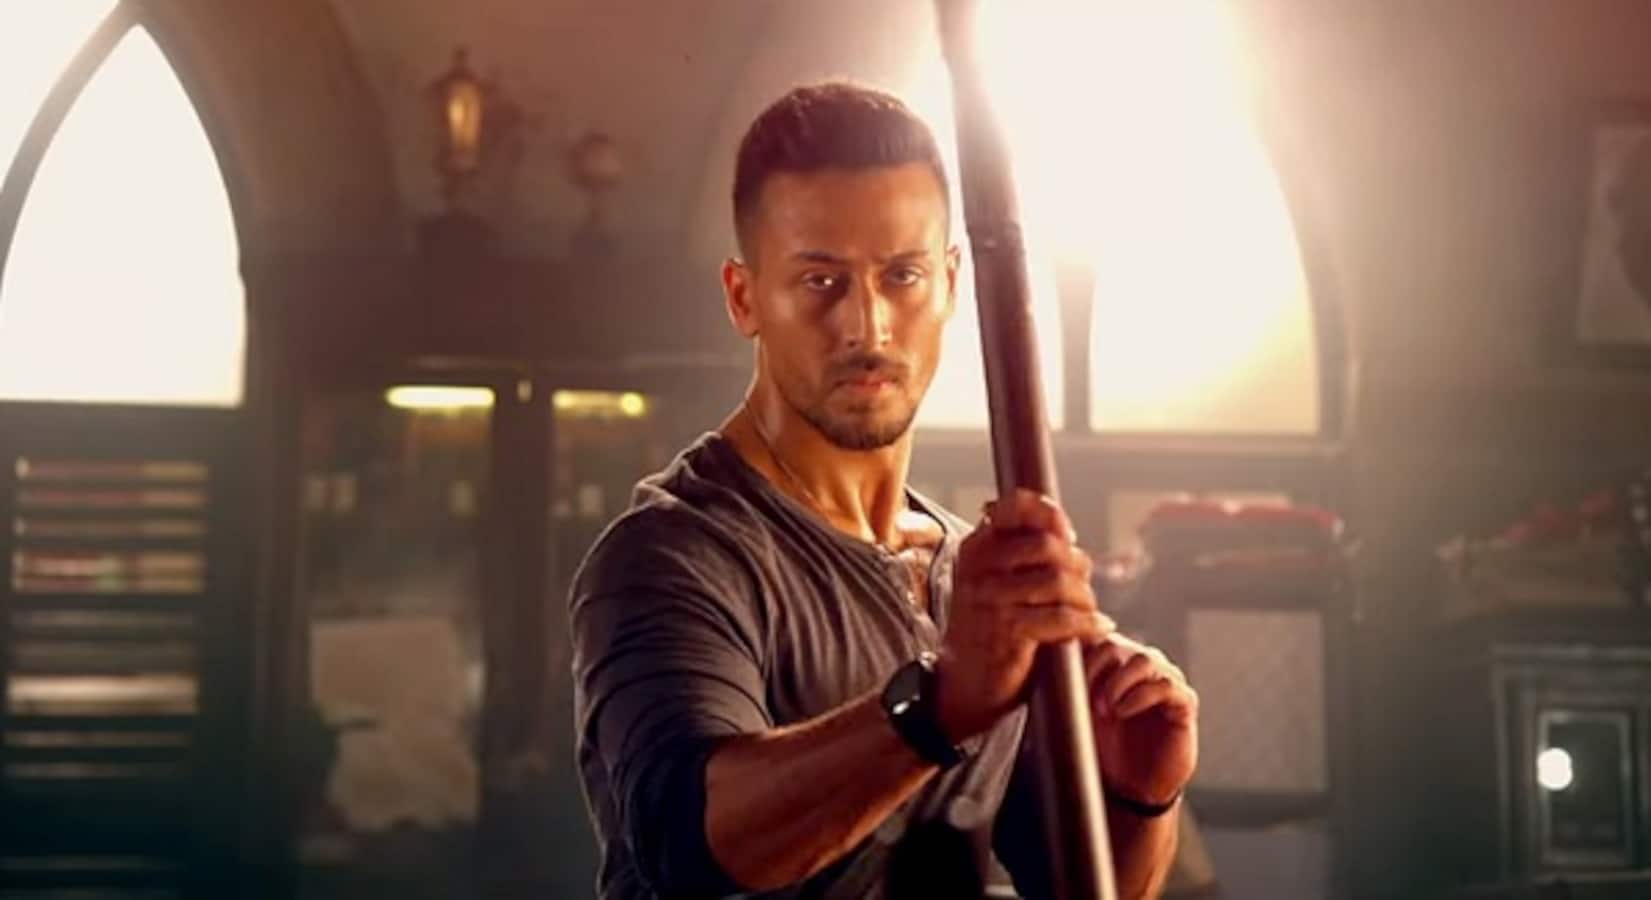 Baaghi 2 will be really important for Tiger Shroff - here's why we think so  - Bollywood News & Gossip, Movie Reviews, Trailers & Videos at  